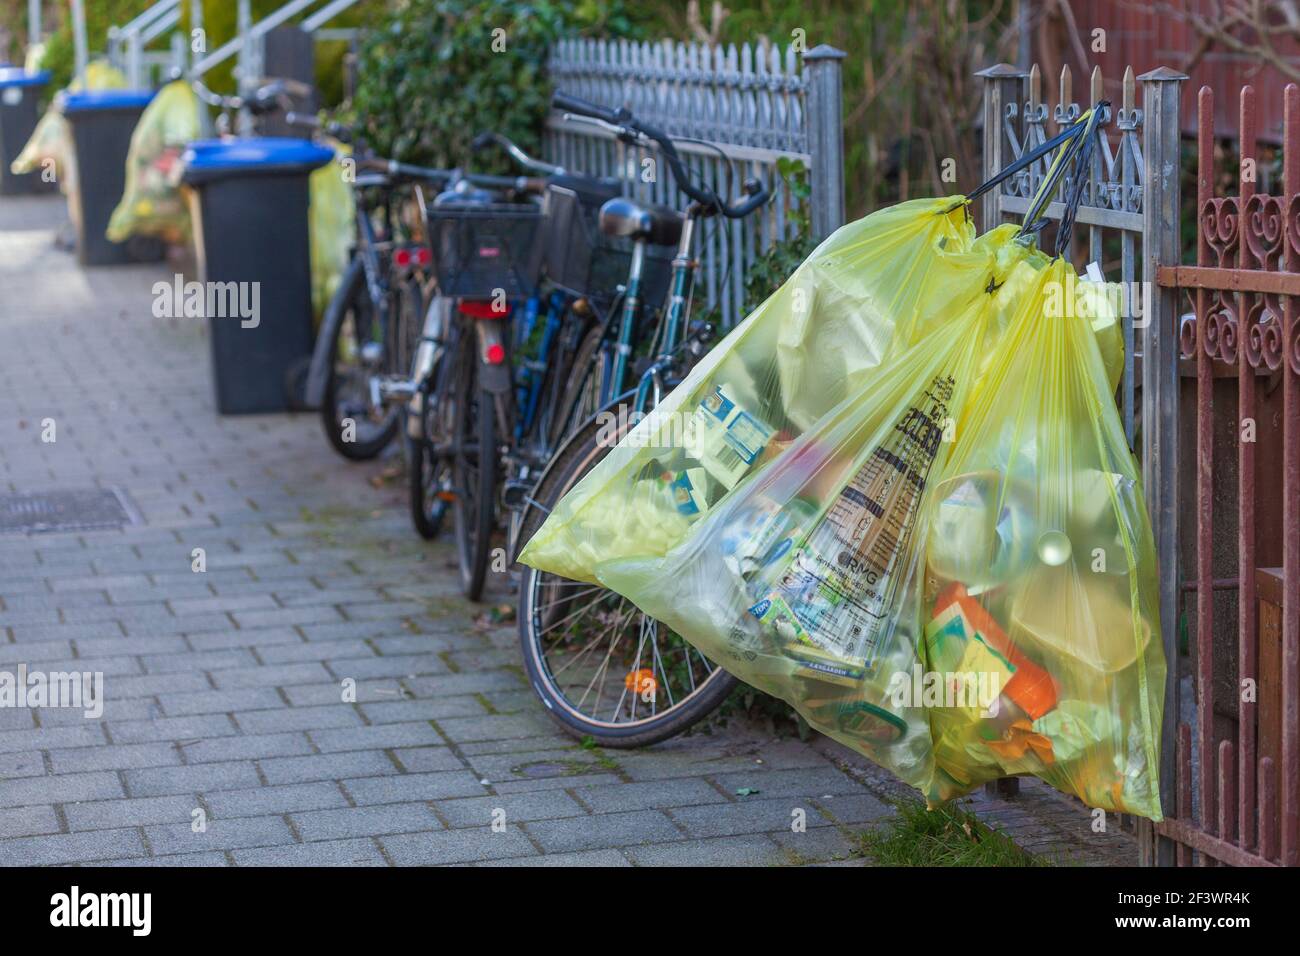 Yellow bags for plastic waste, hanging on a garden fence, Germany Stock Photo